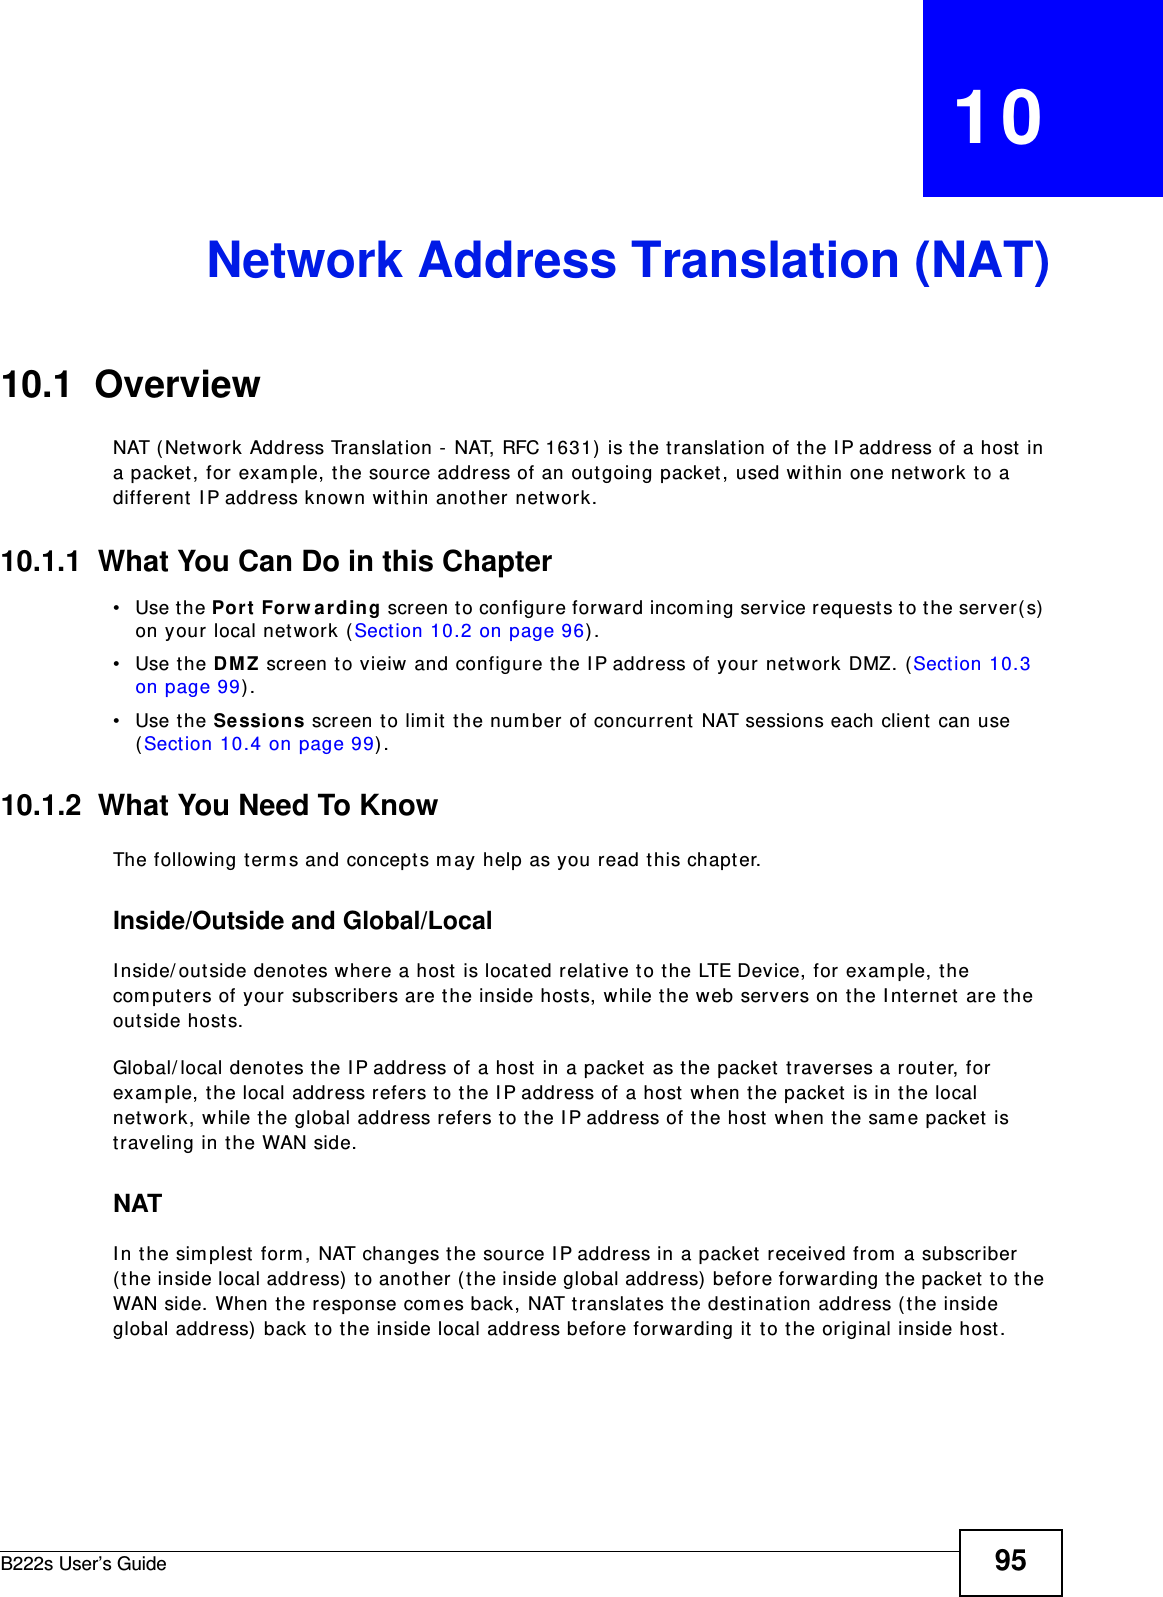 B222s User’s Guide 95CHAPTER   10Network Address Translation (NAT)10.1  Overview NAT ( Net work Address Translat ion - NAT, RFC 1631)  is the t ranslation of t he I P address of a host in a packet , for  exam ple, t he source address of an out going packet , used within one net work t o a different  I P address known within anot her network.10.1.1  What You Can Do in this Chapter• Use the Port  For w arding screen t o configure forward incom ing service request s to t he server( s)  on your local network ( Sect ion 10.2 on page 96) .• Use the DMZ screen t o vieiw and configure t he I P address of your net work DMZ. ( Sect ion 10.3 on page 99) . • Use the Sessions screen to lim it the num ber of concurrent NAT sessions each client can use (Section 10.4 on page 99) . 10.1.2  What You Need To KnowThe following term s and concept s m ay help as you read this chapt er.Inside/Outside and Global/LocalI nside/ out side denot es where a host is located relat ive t o t he LTE Device, for exam ple, t he com puters of your subscribers are the inside hosts, while t he web servers on the I nt ernet  are the out side host s. Global/ local denot es the I P address of a host  in a packet  as t he packet traverses a r out er, for exam ple, t he local address refers t o the I P address of a host  when the packet is in t he local network, while t he global address refers t o t he I P address of t he host w hen t he sam e packet  is traveling in t he WAN side. NATI n t he sim plest form , NAT changes the sour ce I P address in a packet  received from  a subscriber ( t he inside local address)  t o anot her ( the inside global address)  before forwarding t he packet t o t he WAN side. When t he response com es back, NAT t ranslat es the destinat ion address ( the inside global addr ess)  back t o t he inside local address before forwarding it  t o the original inside host.